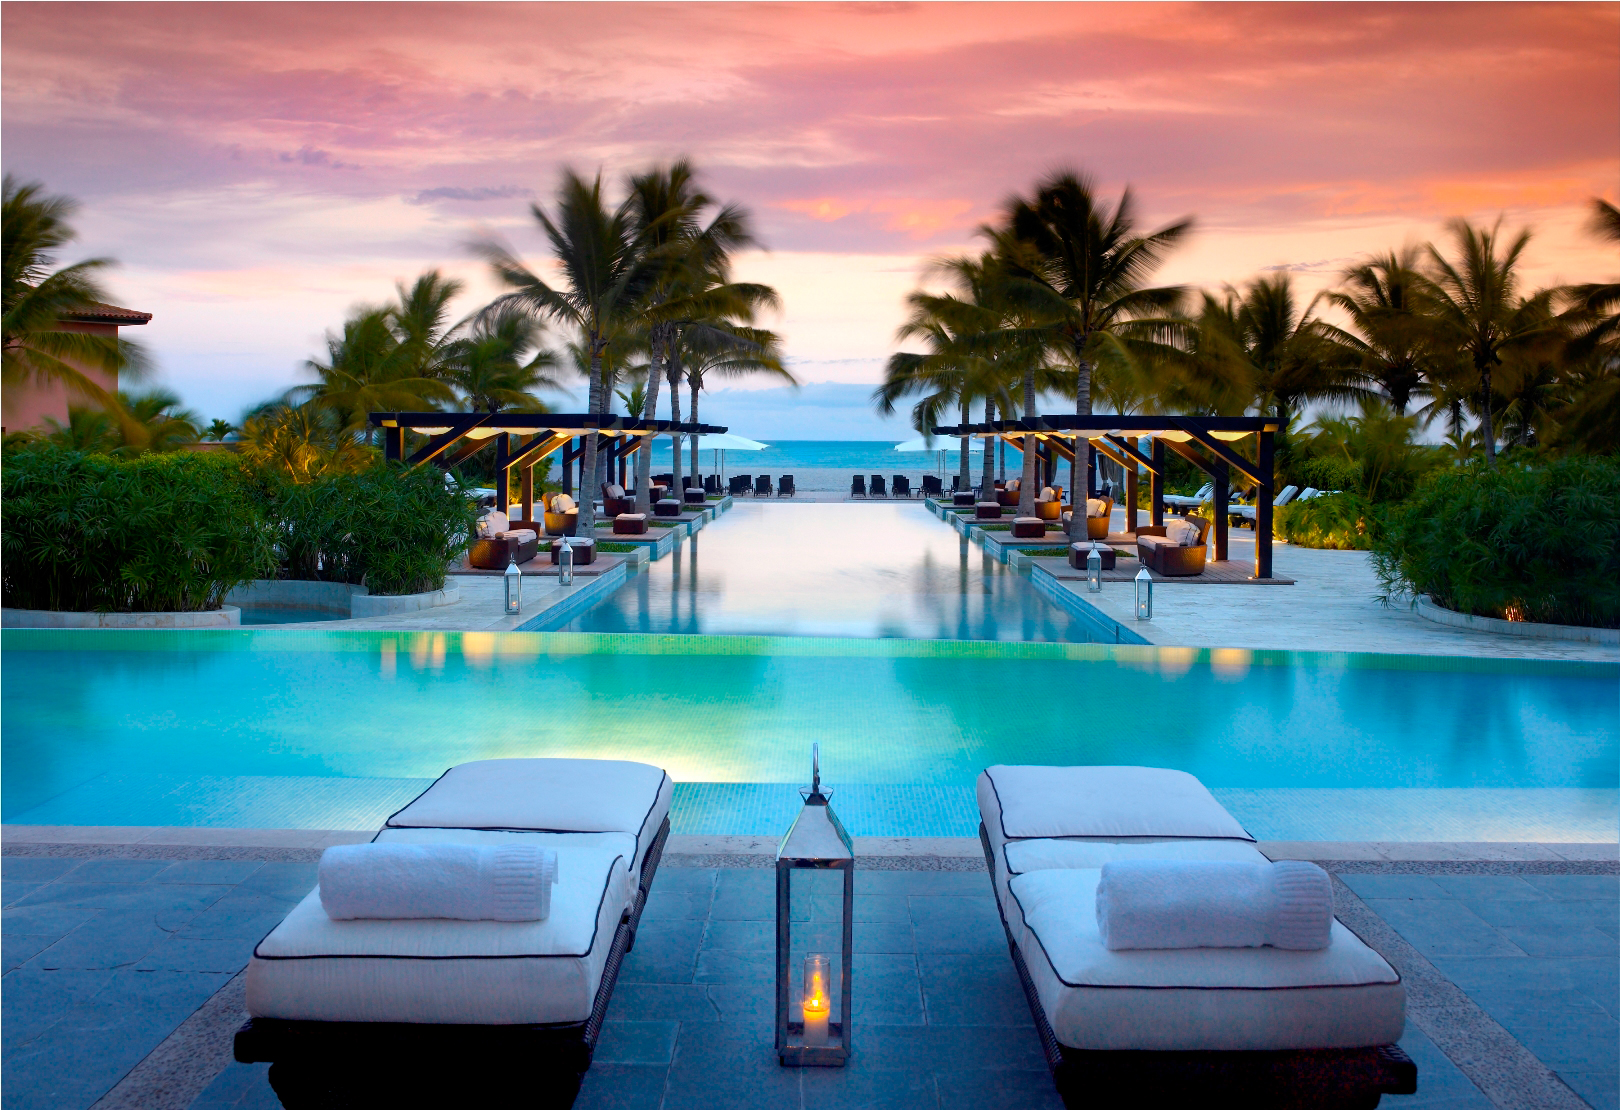 Featured image for “JW Marriott Panama”